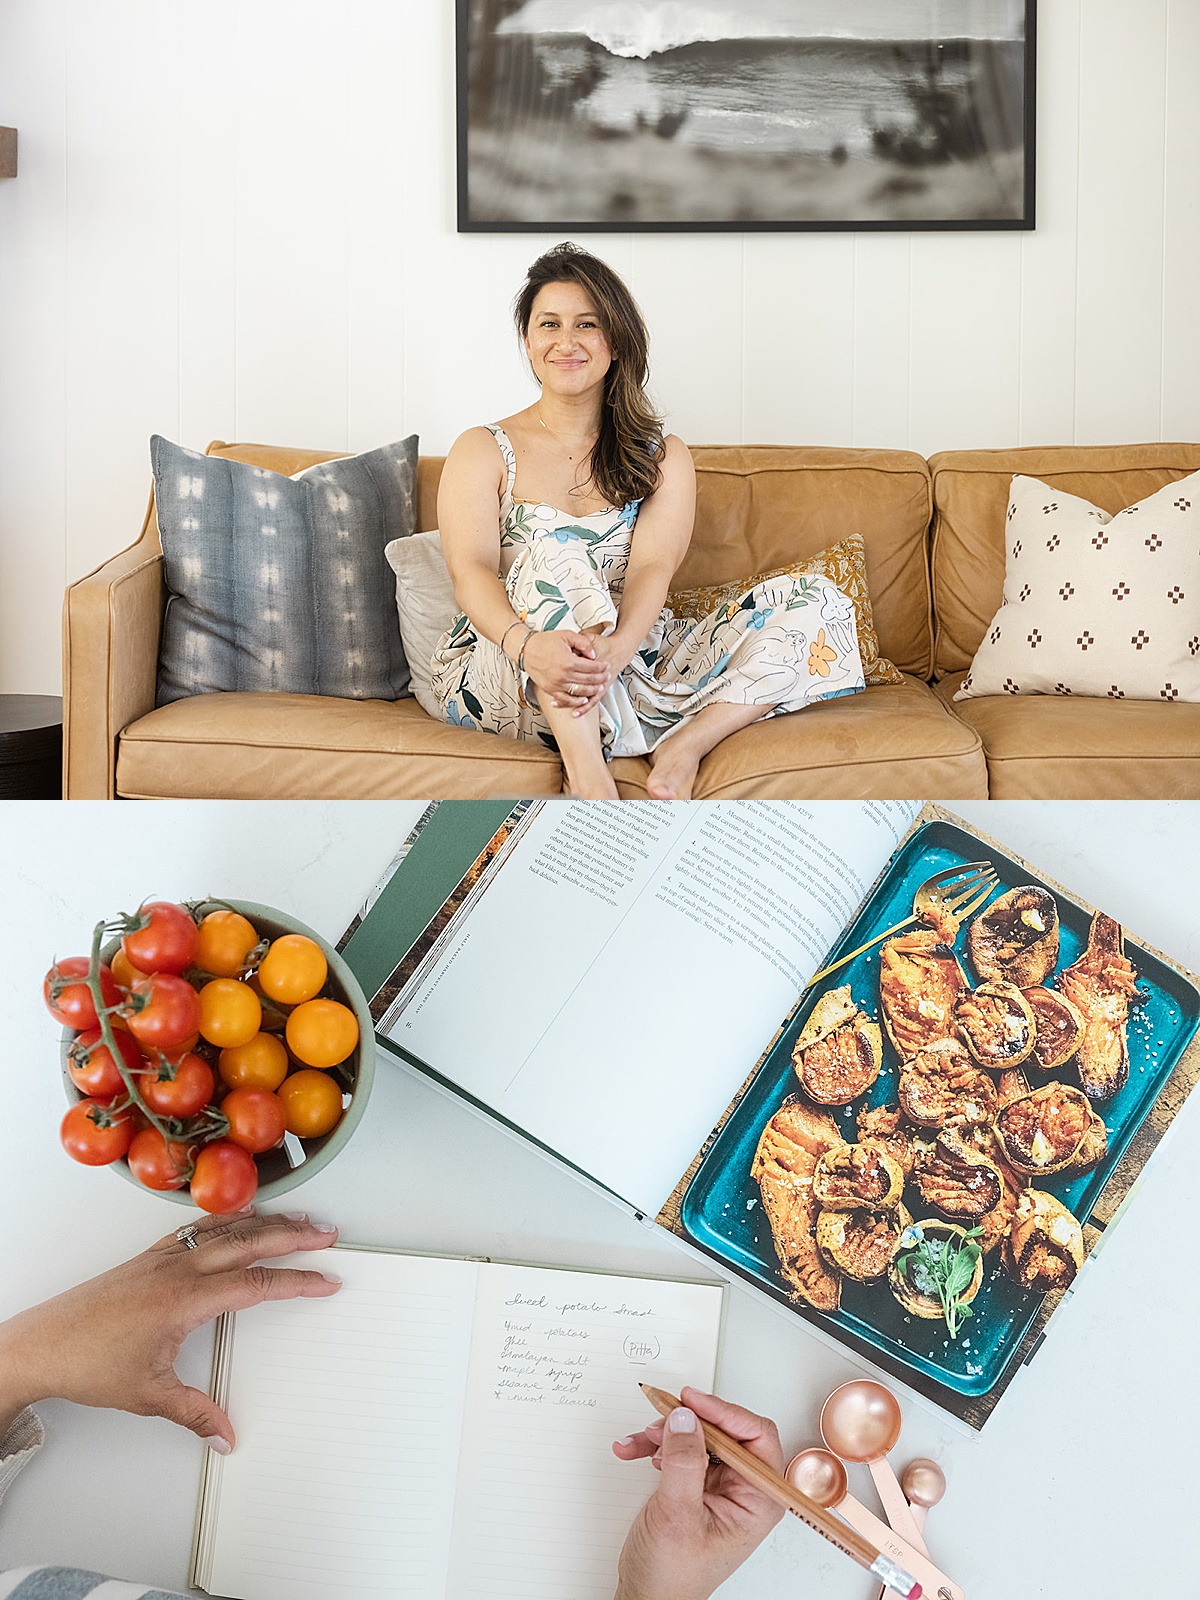 women writing notes in her book for her health and wellness photoshoot